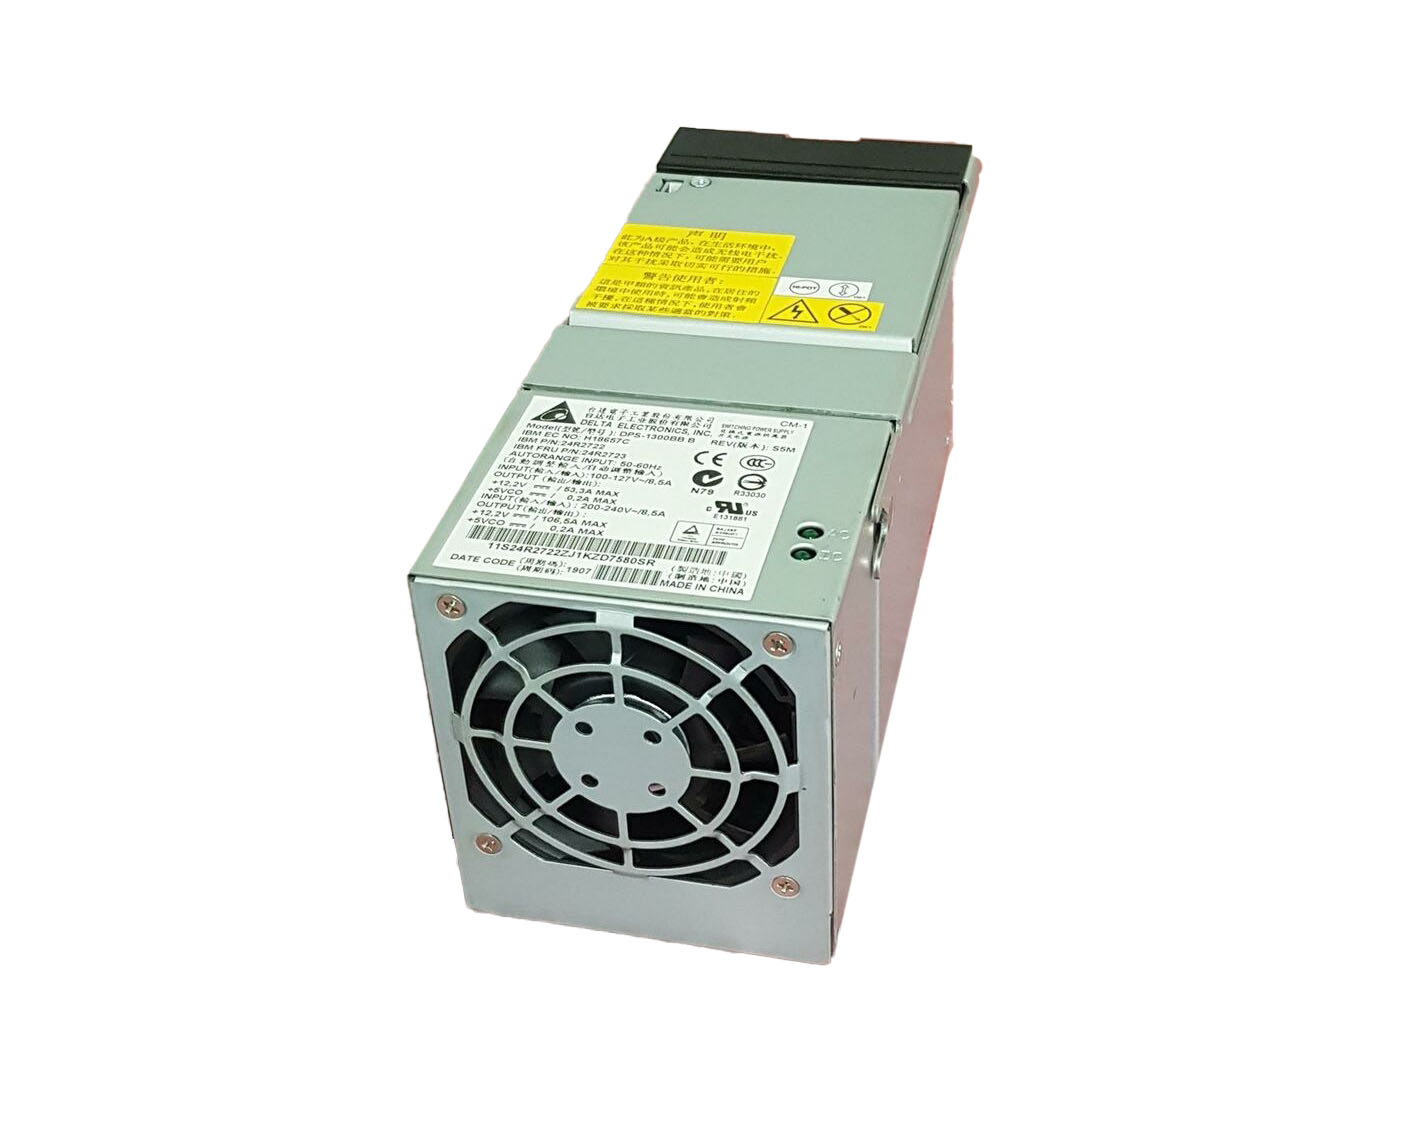 Delta DPS-1300BB-B 1300-Watts Hot-Swappable Power Supply for xSeries x366 / x3850 / x3950